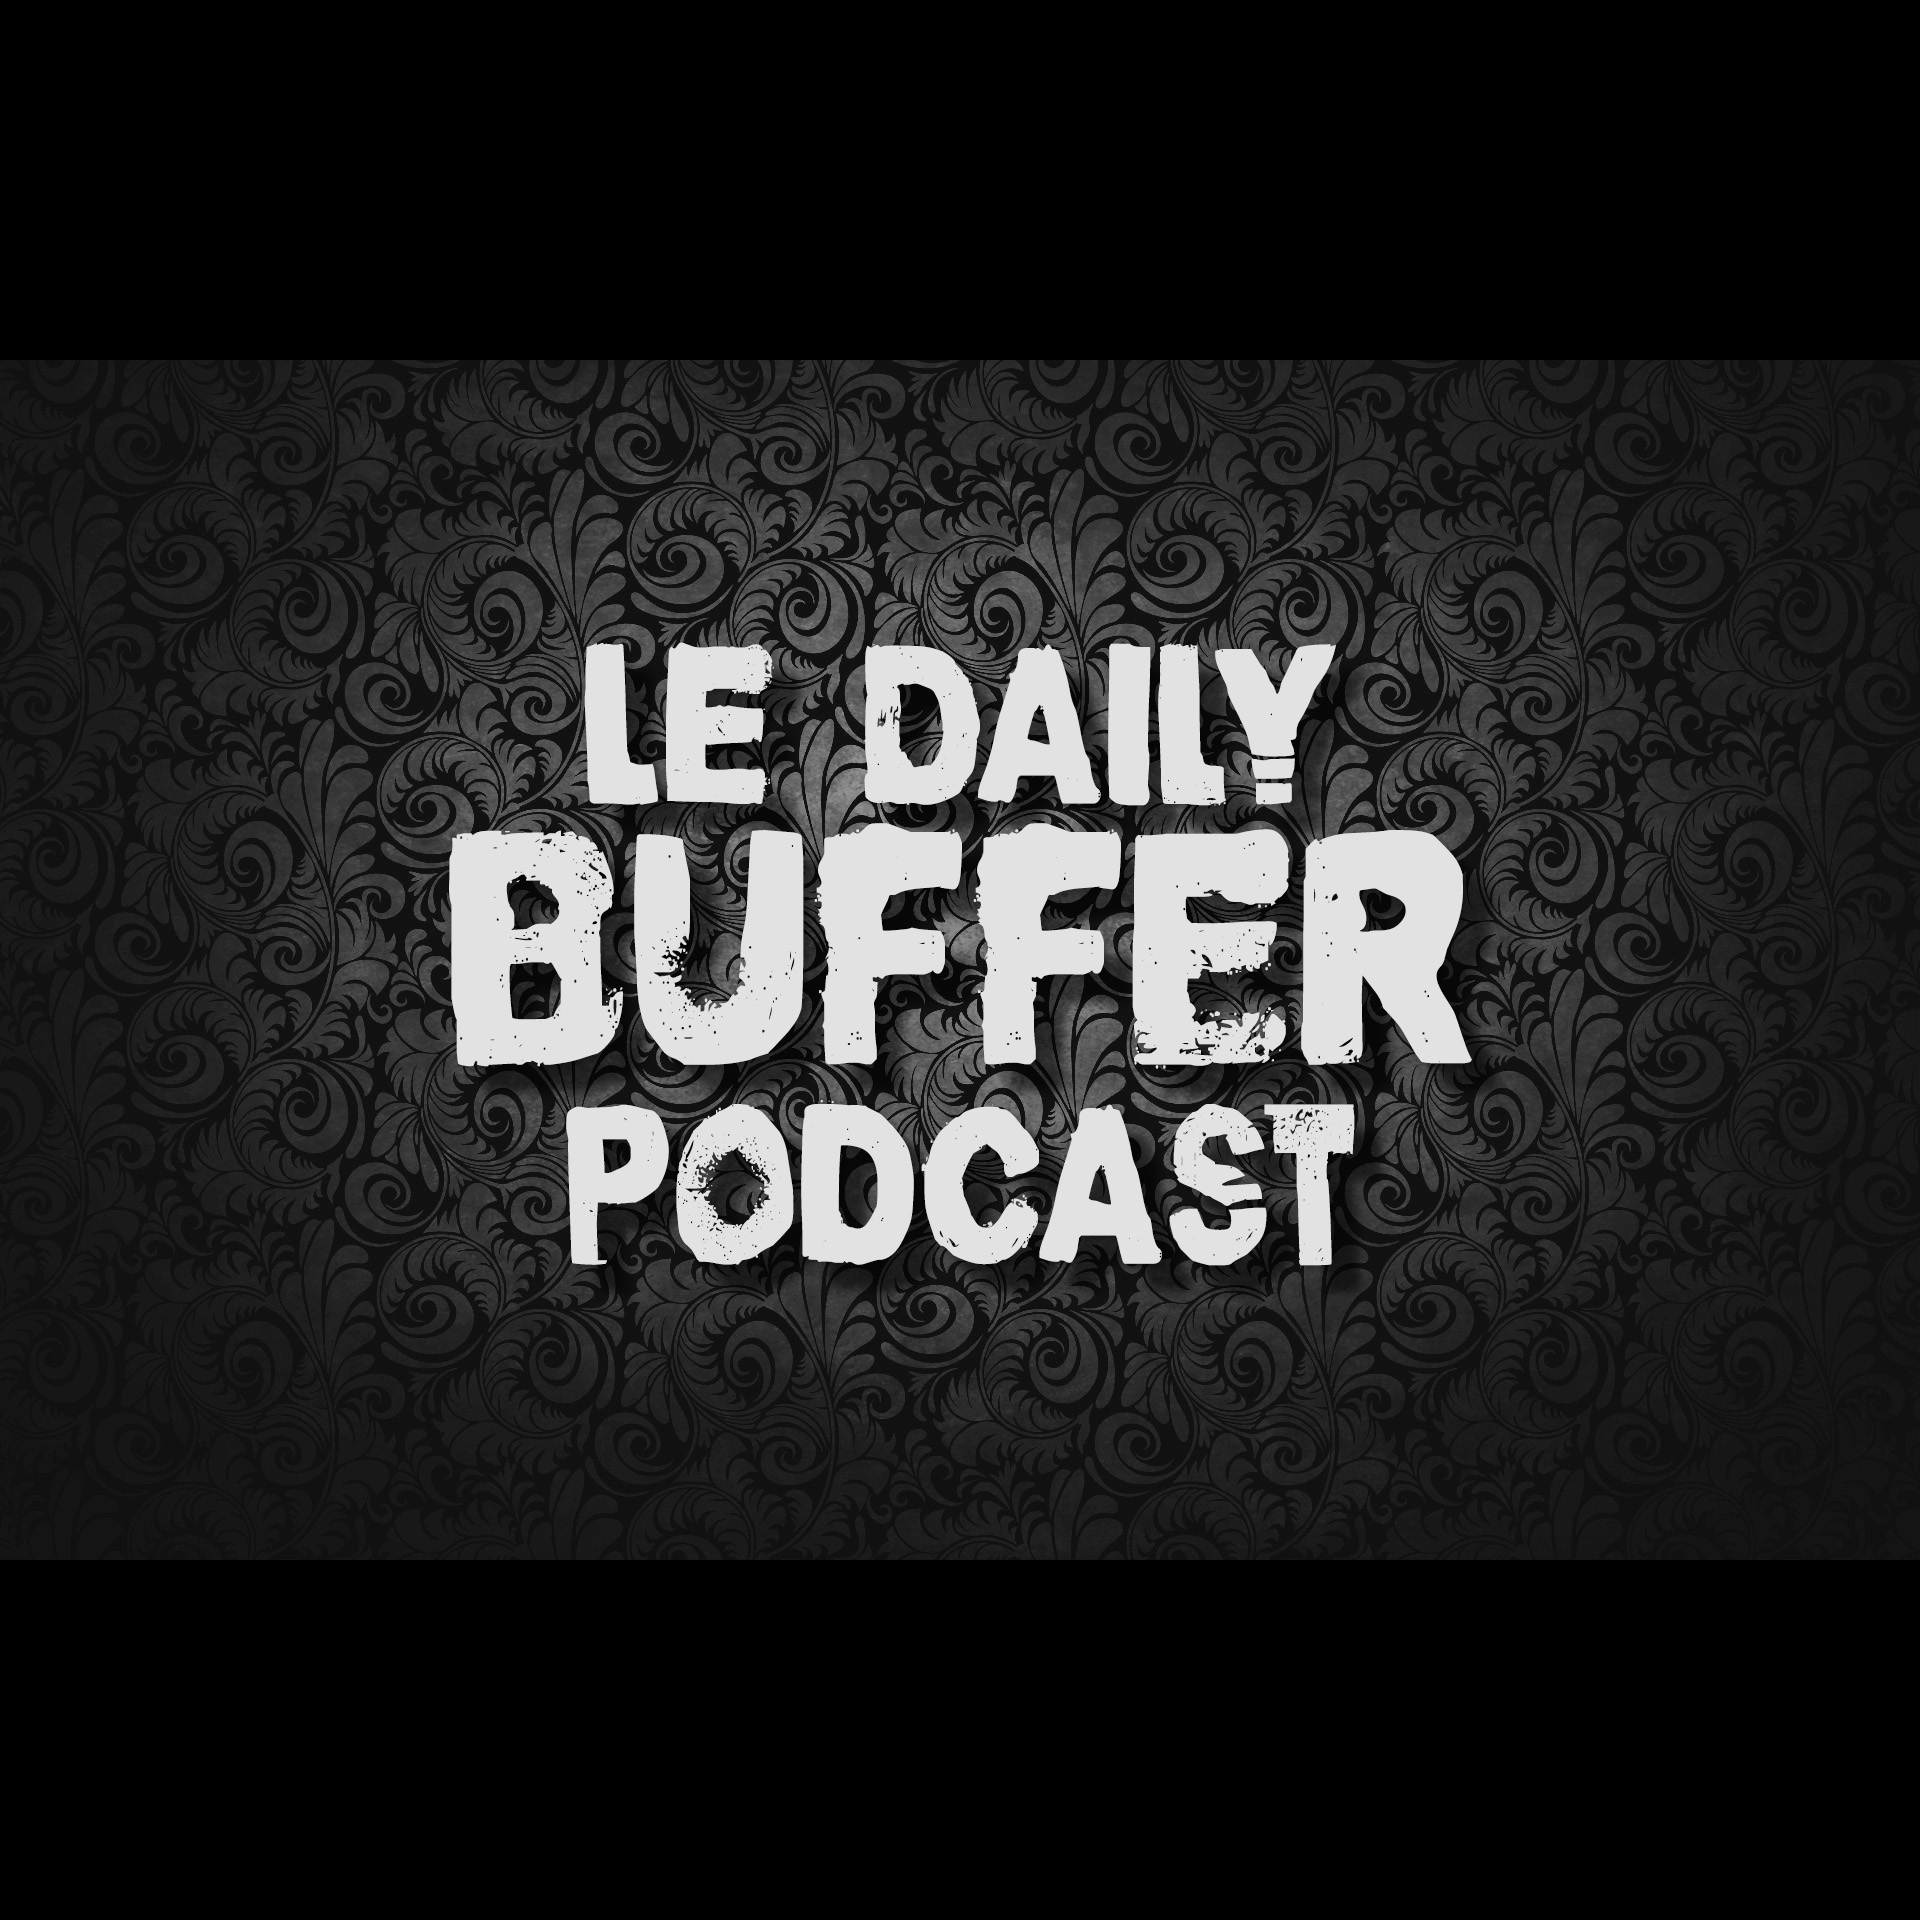 Le Daily Buffer Podcast - 2019 02 22 - Les commentaires Facebook